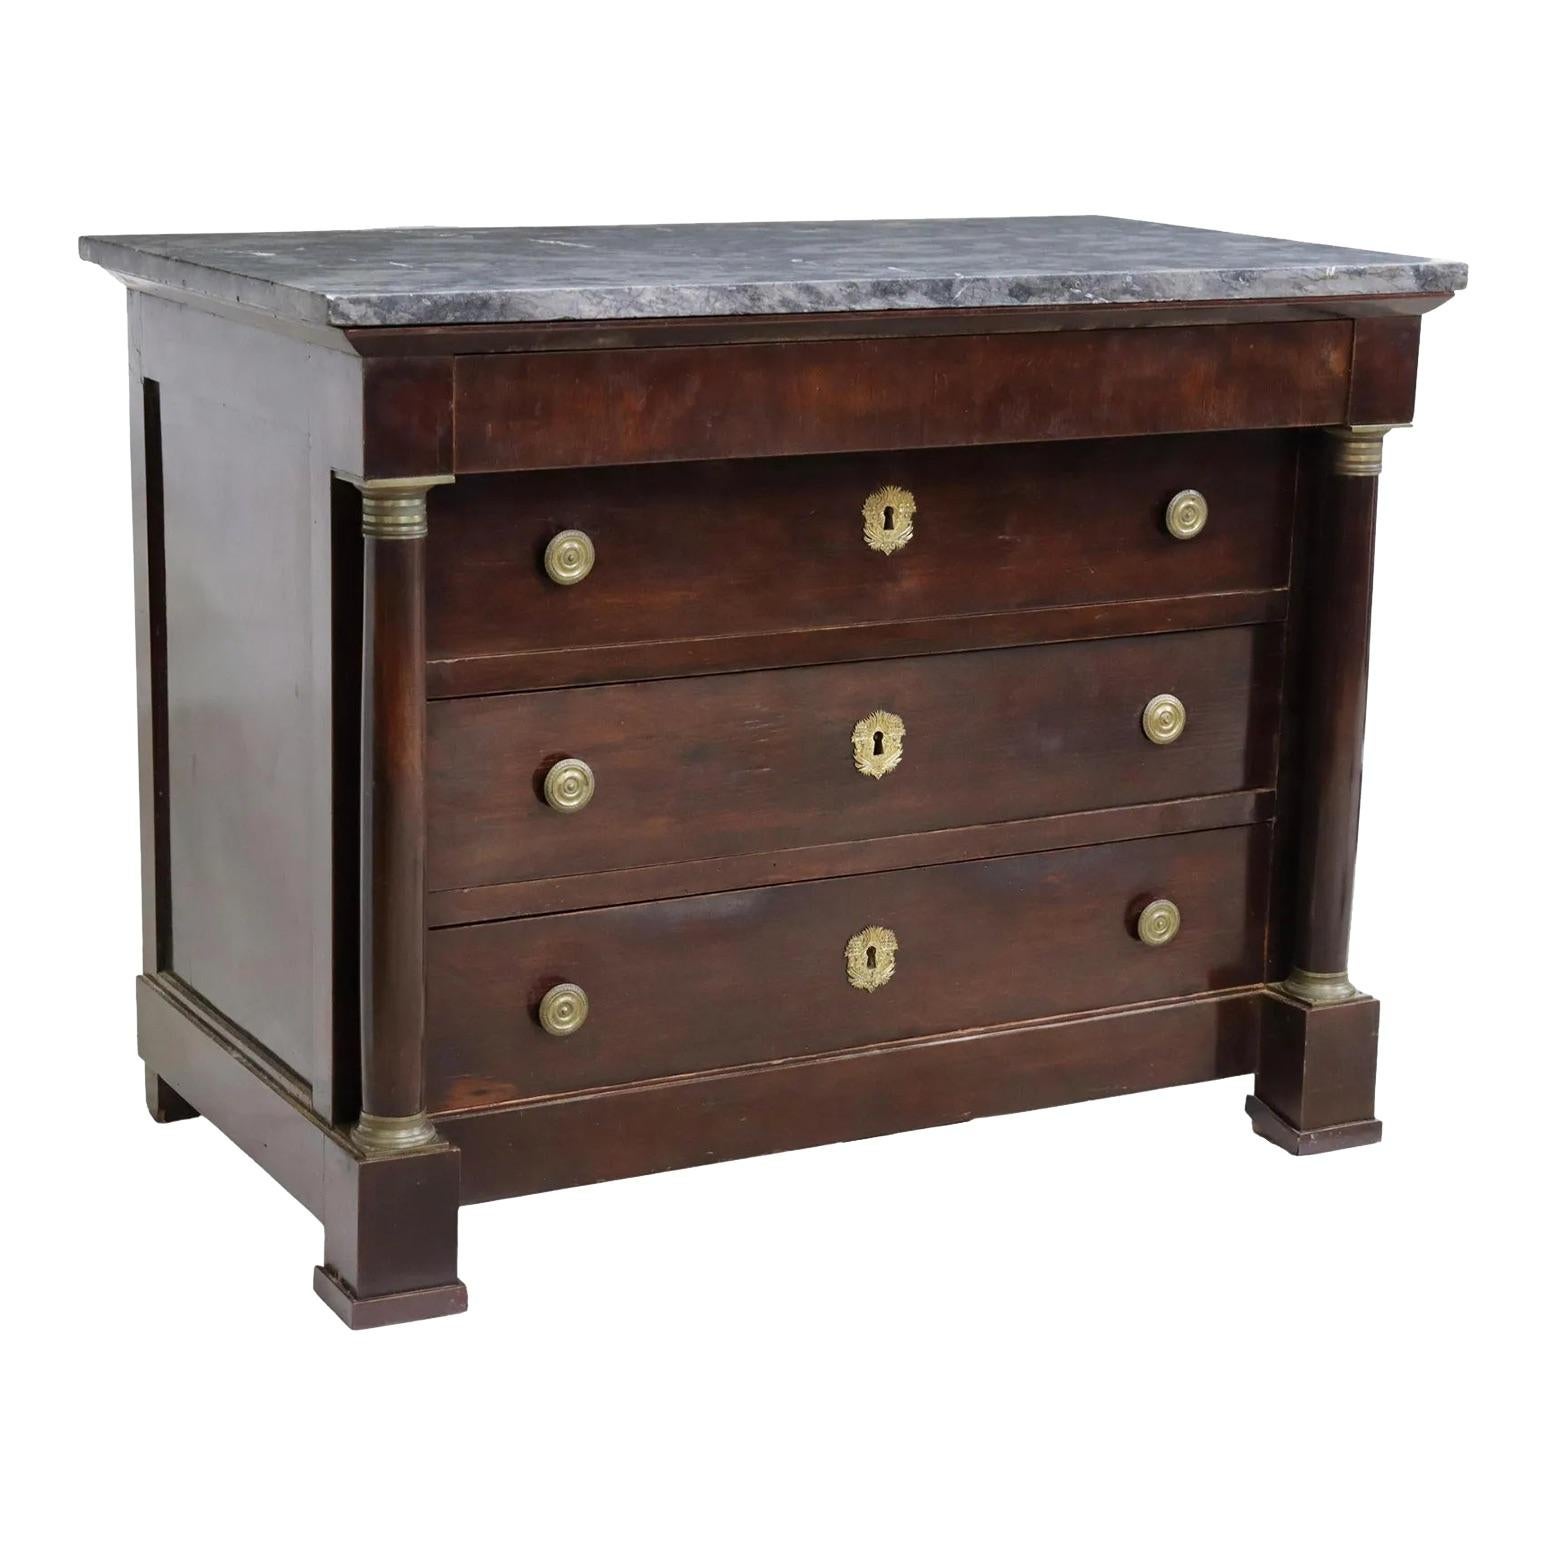 Antique French Empire Style Marble-Top Mahogany Commode For Sale